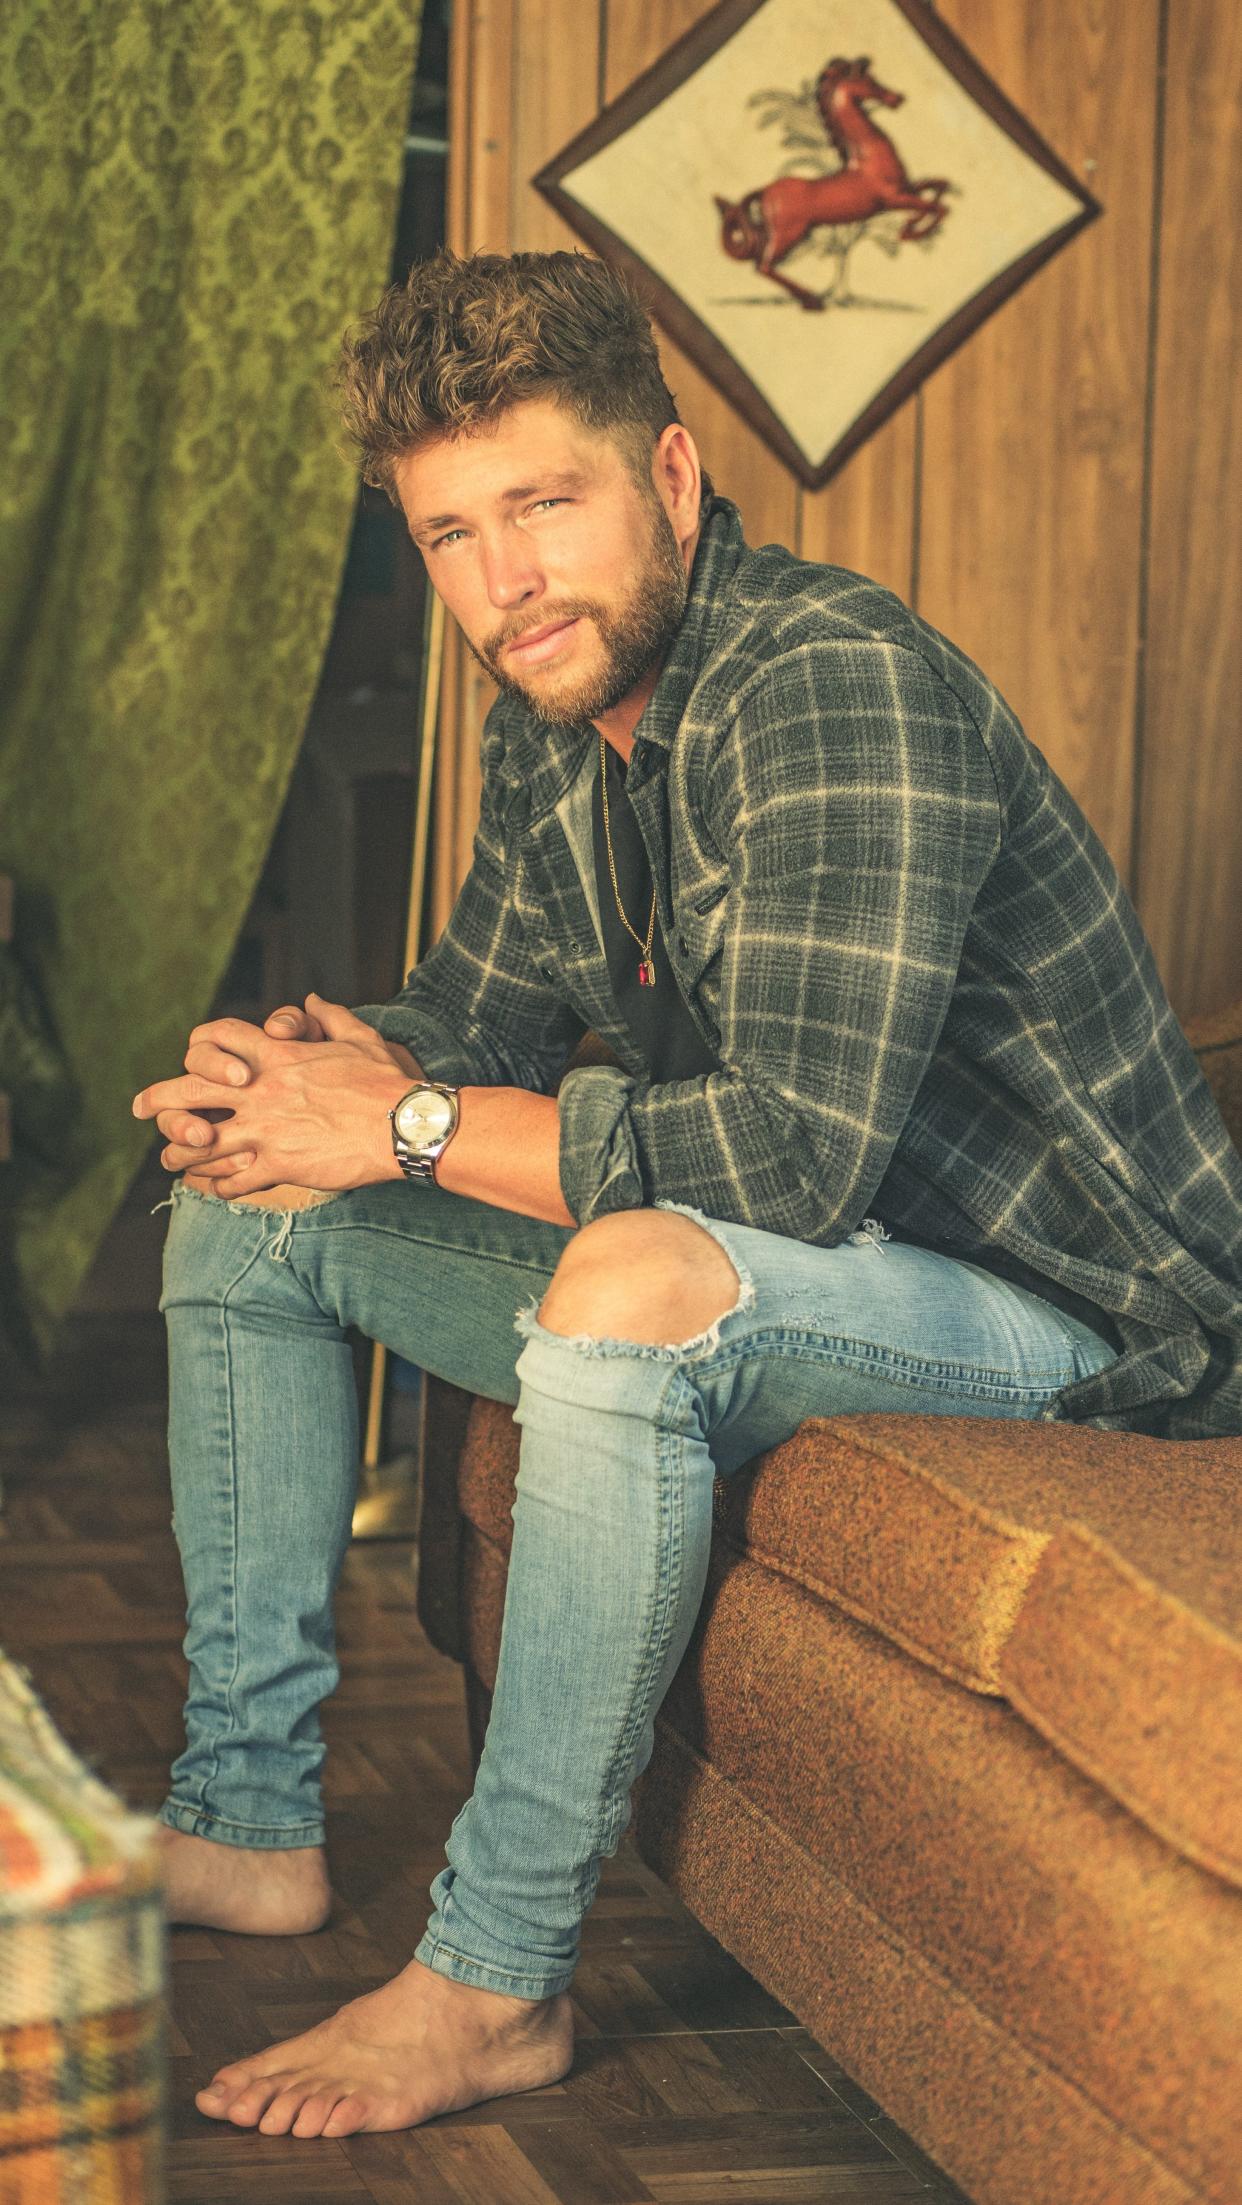 Chris Lane will perform at this year's 7th Inning Stretch Festival.